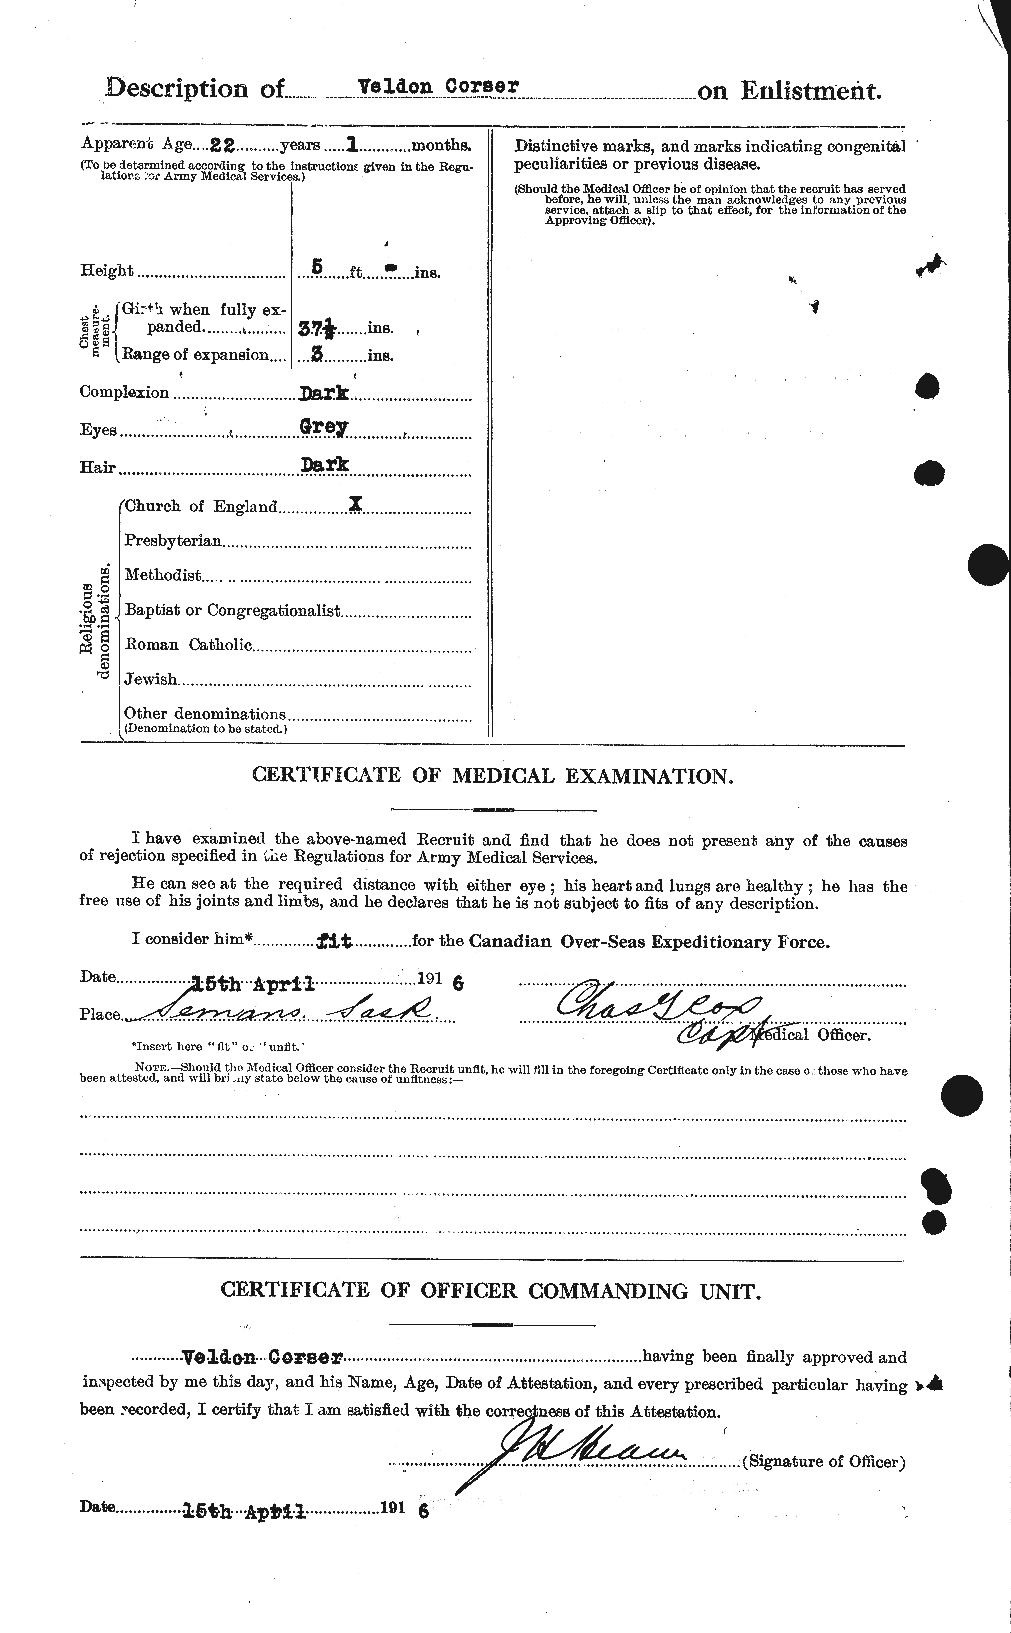 Personnel Records of the First World War - CEF 054189b